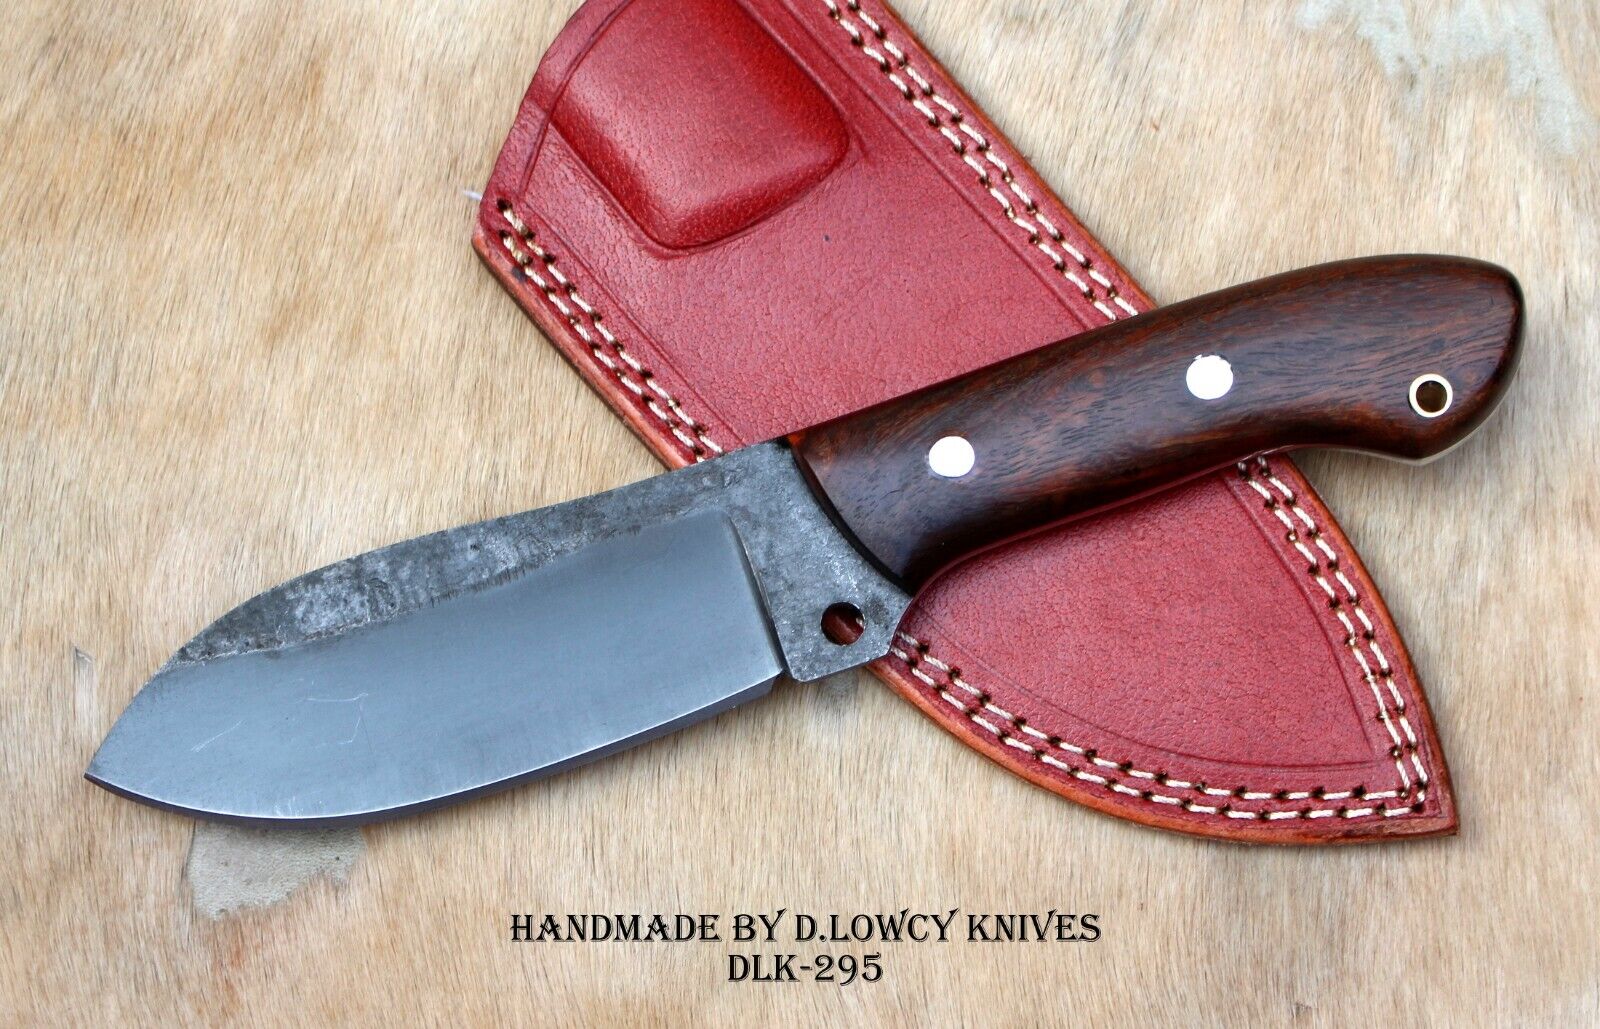 DLK HANDMADE, FORGED 1095 HIGH CARBON STEEL HUNTING CAMPING FIX BLADE KNIFE NI